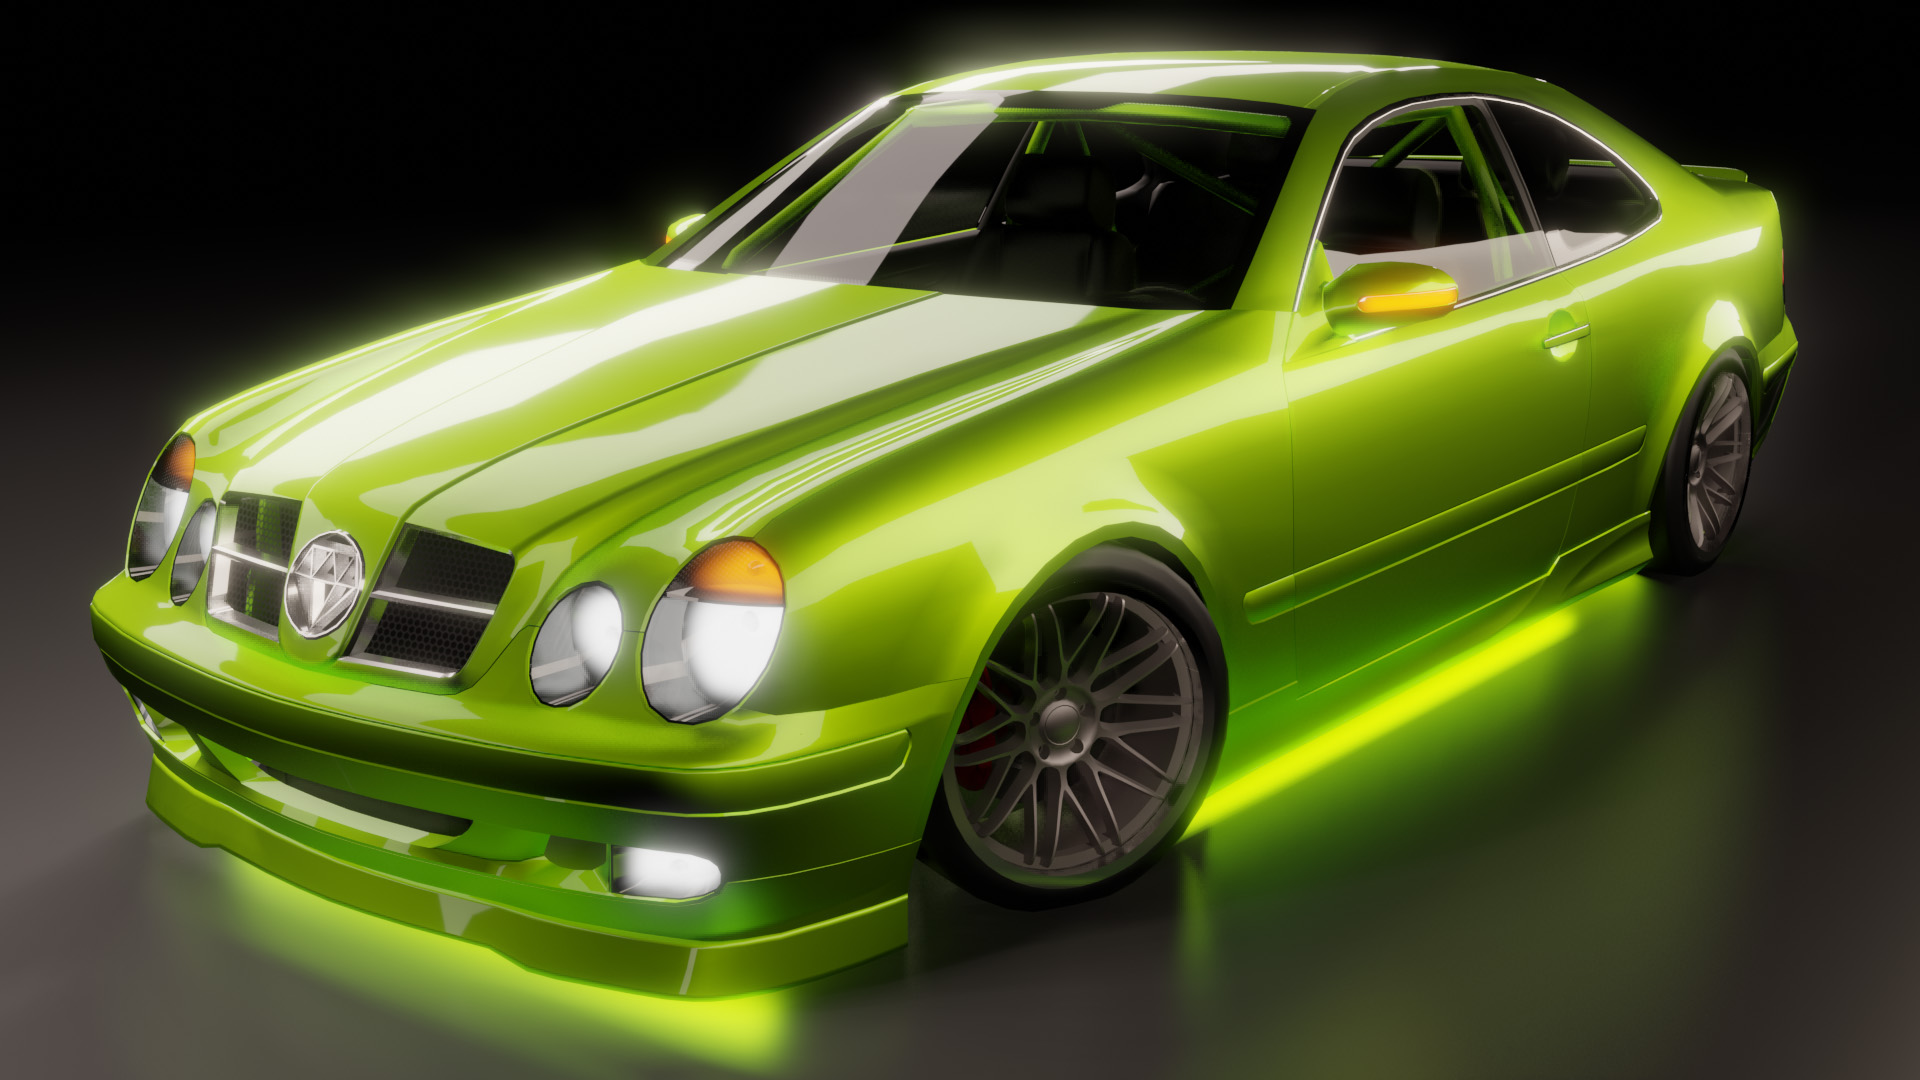 CAR TUNE: Project bei Steam